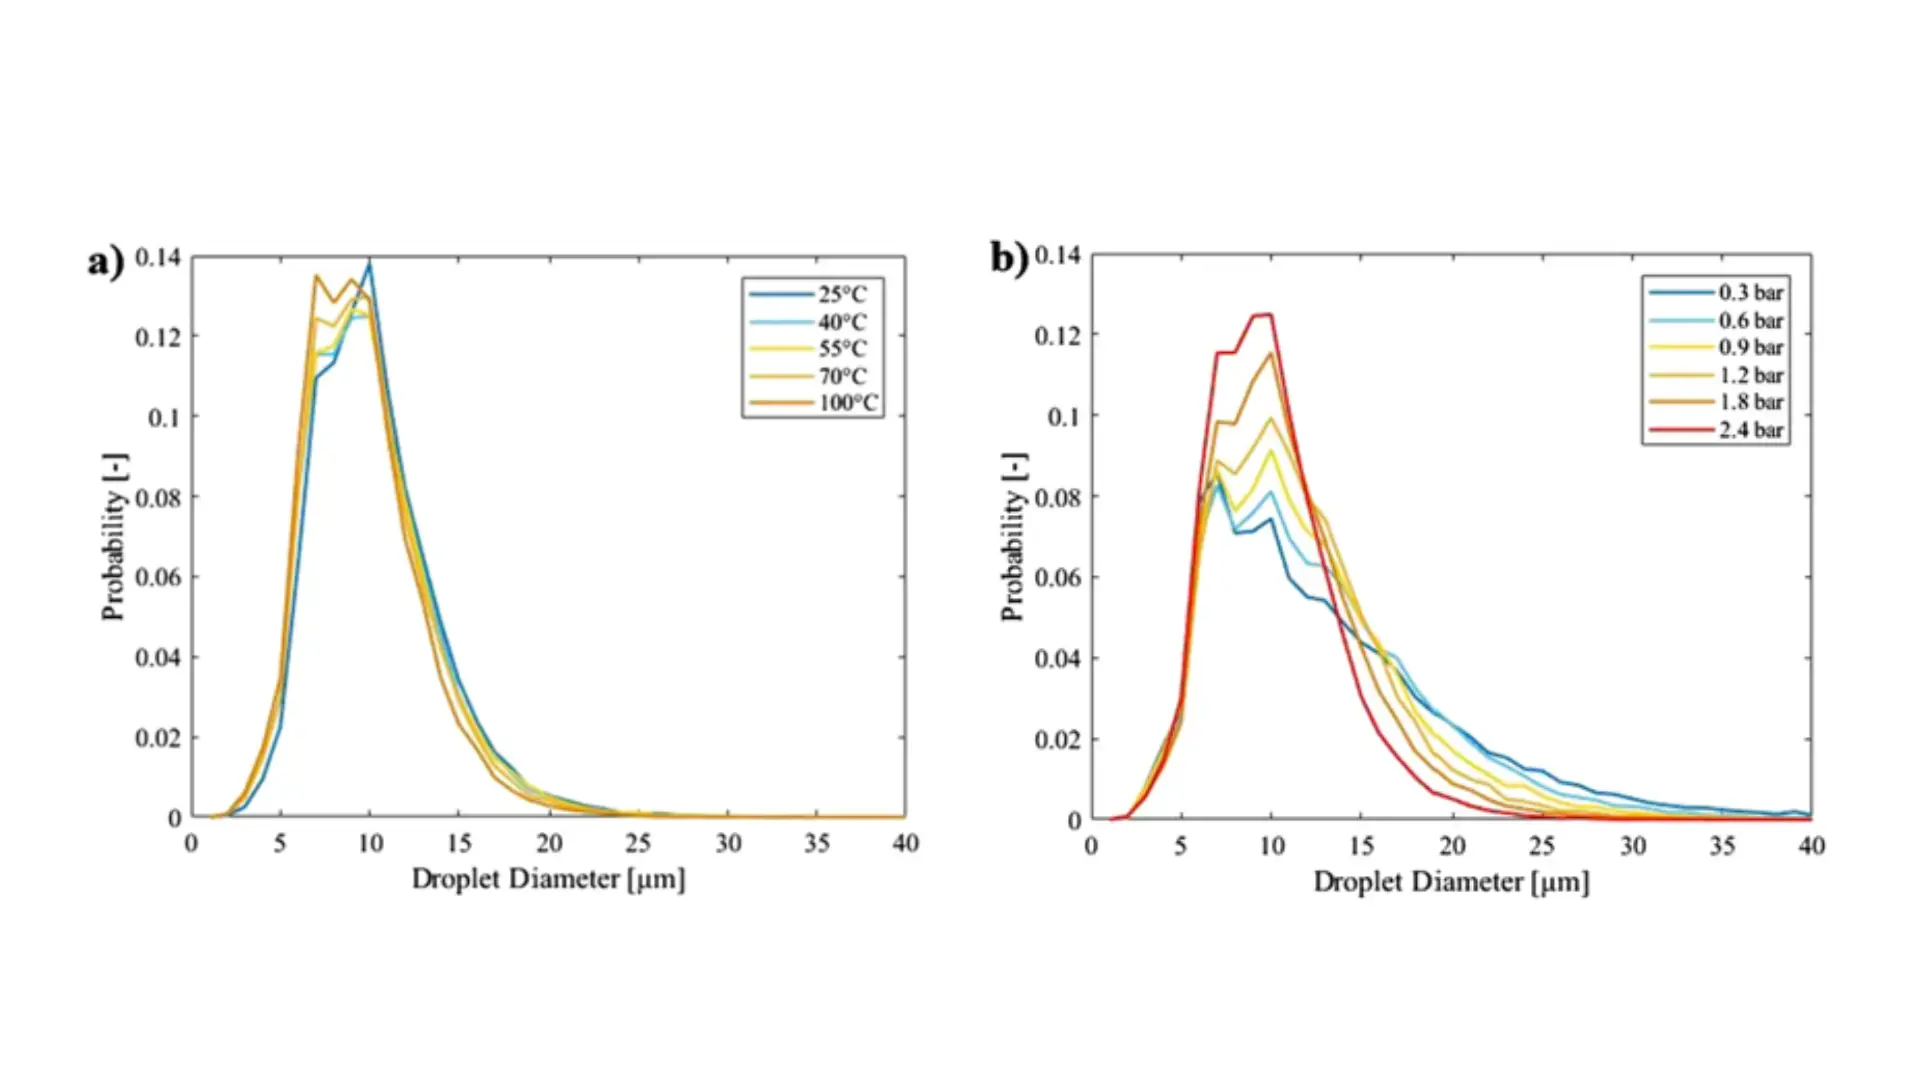 (a)Effects of the preheated liquid temperature and (b) atomization gauge pressure on droplet size distribution of water at 2.4 bar and at 25 °C, respectively. The bin size applied was a uniform 1 µm.